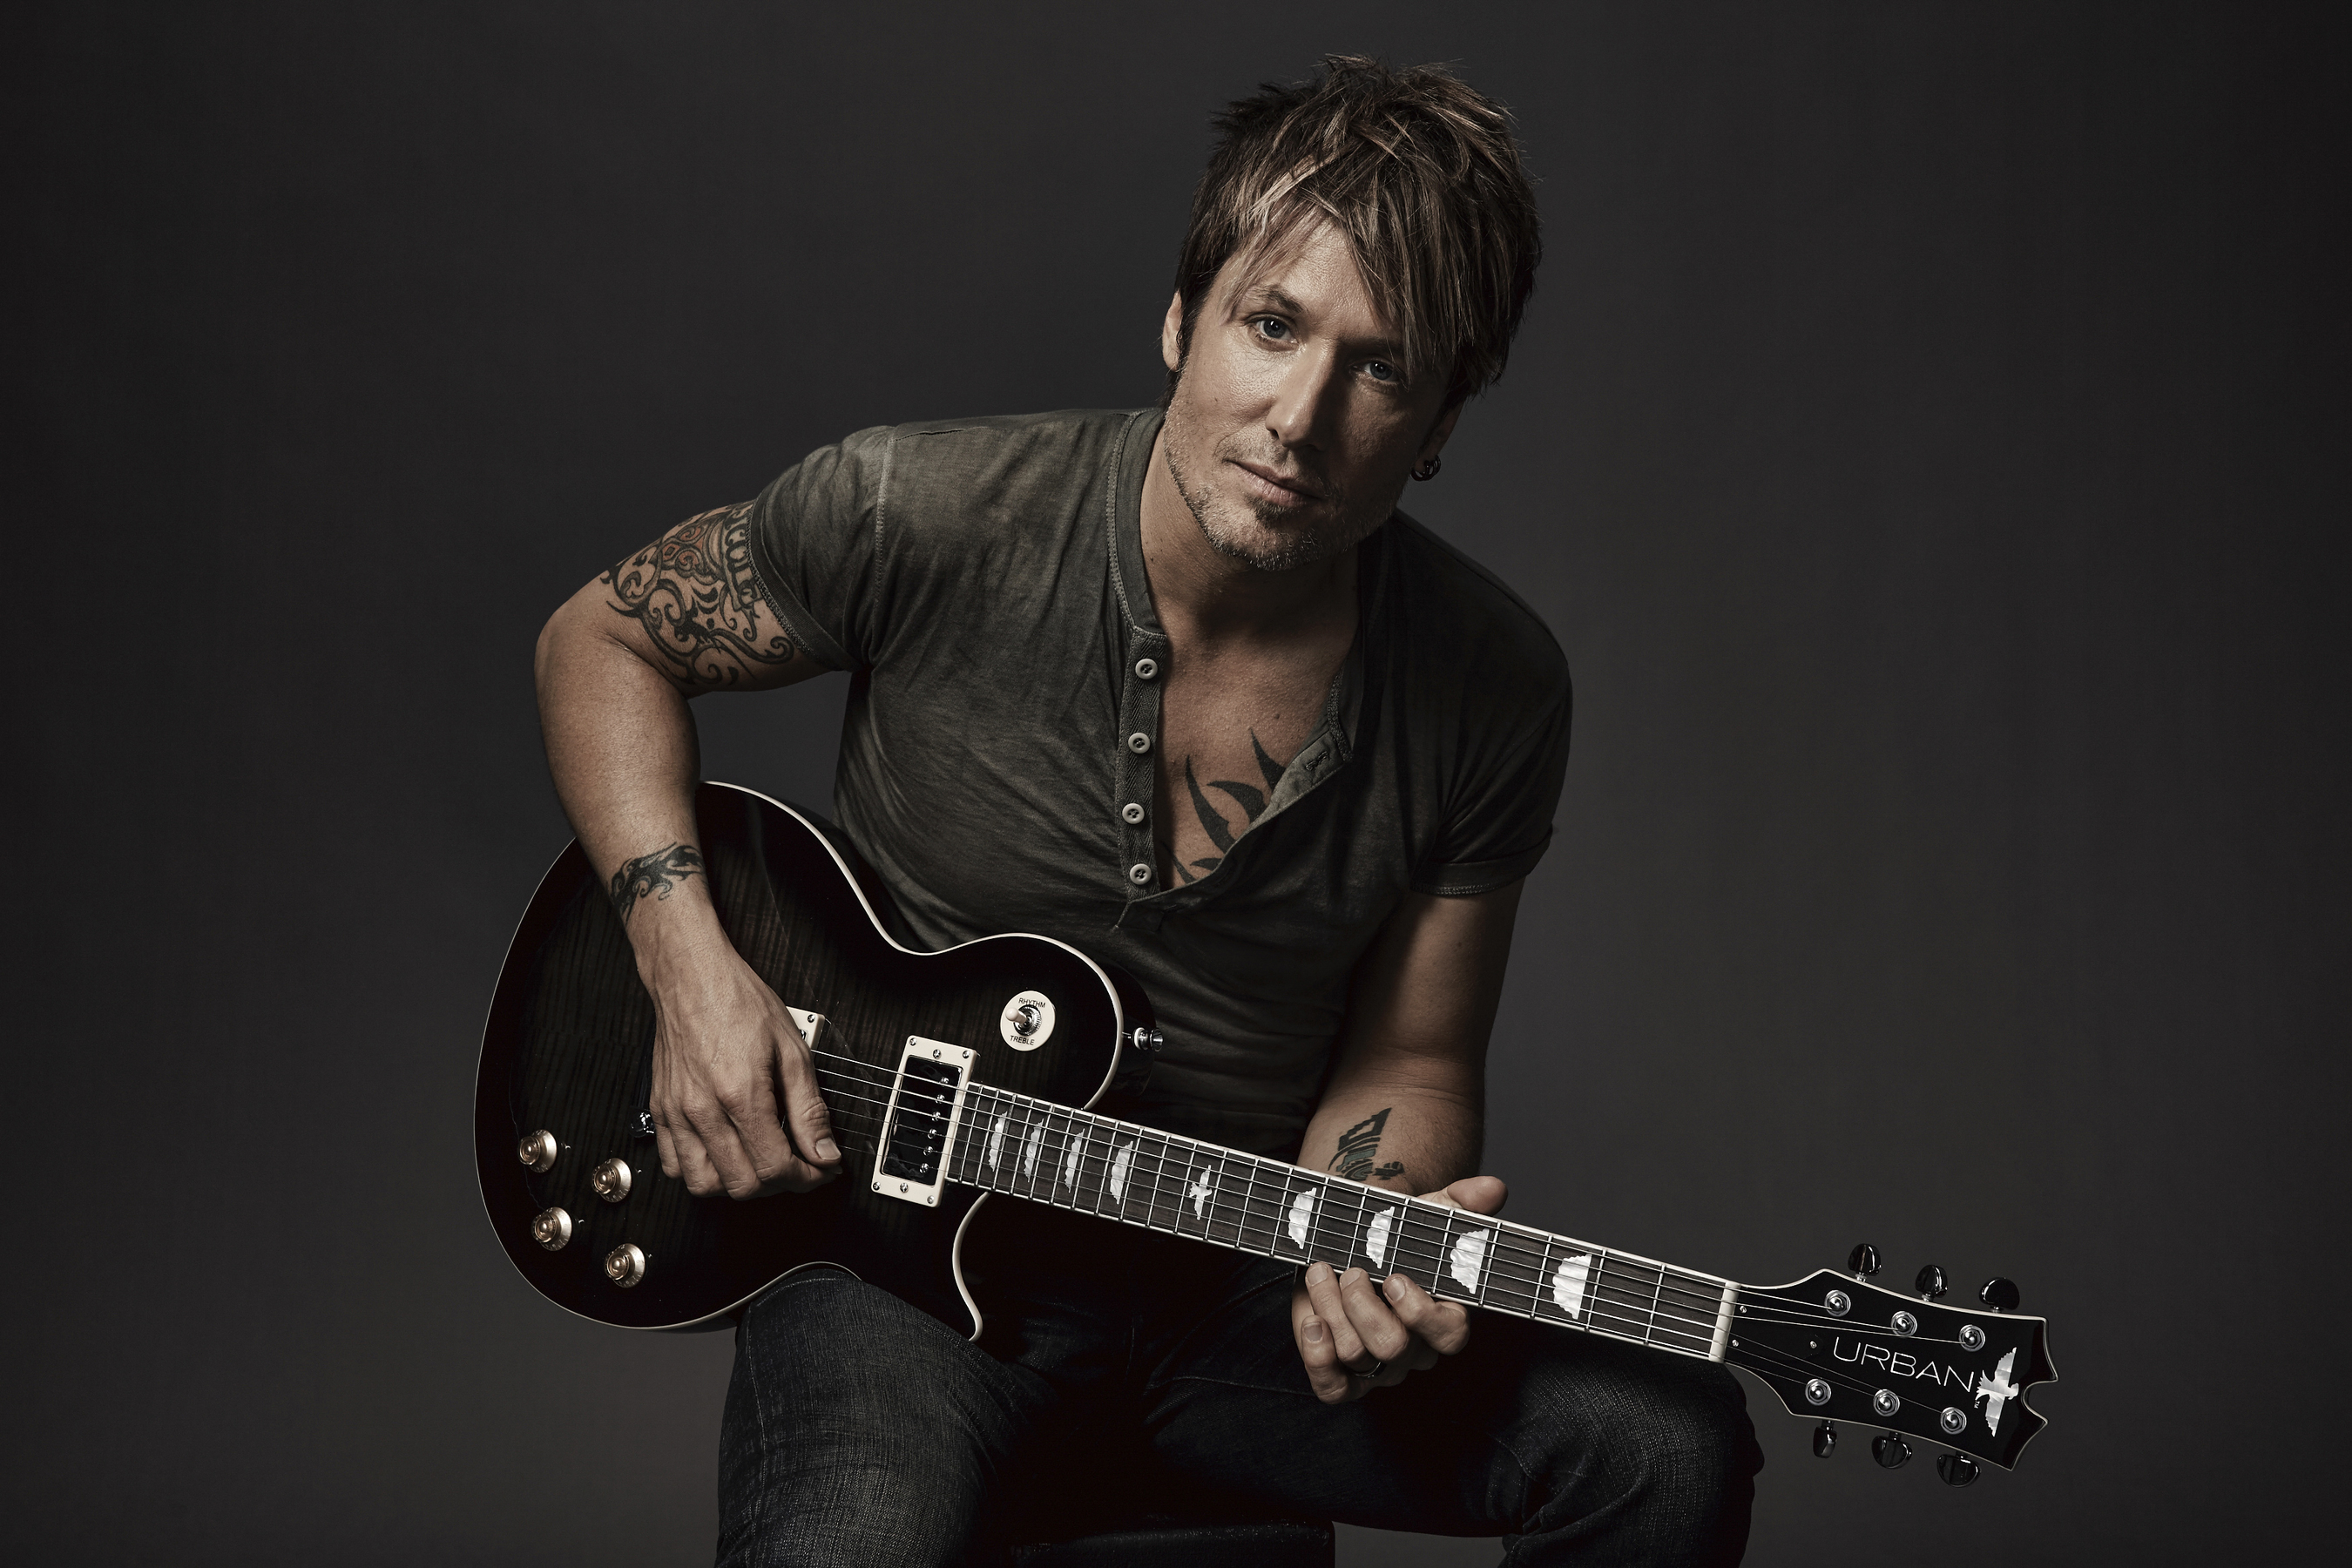 Keith Urban Returns to HSN with Limited Edition 'Light The Fuse' Guitar Collection on HSN May 18th (PRNewsFoto/HSN)